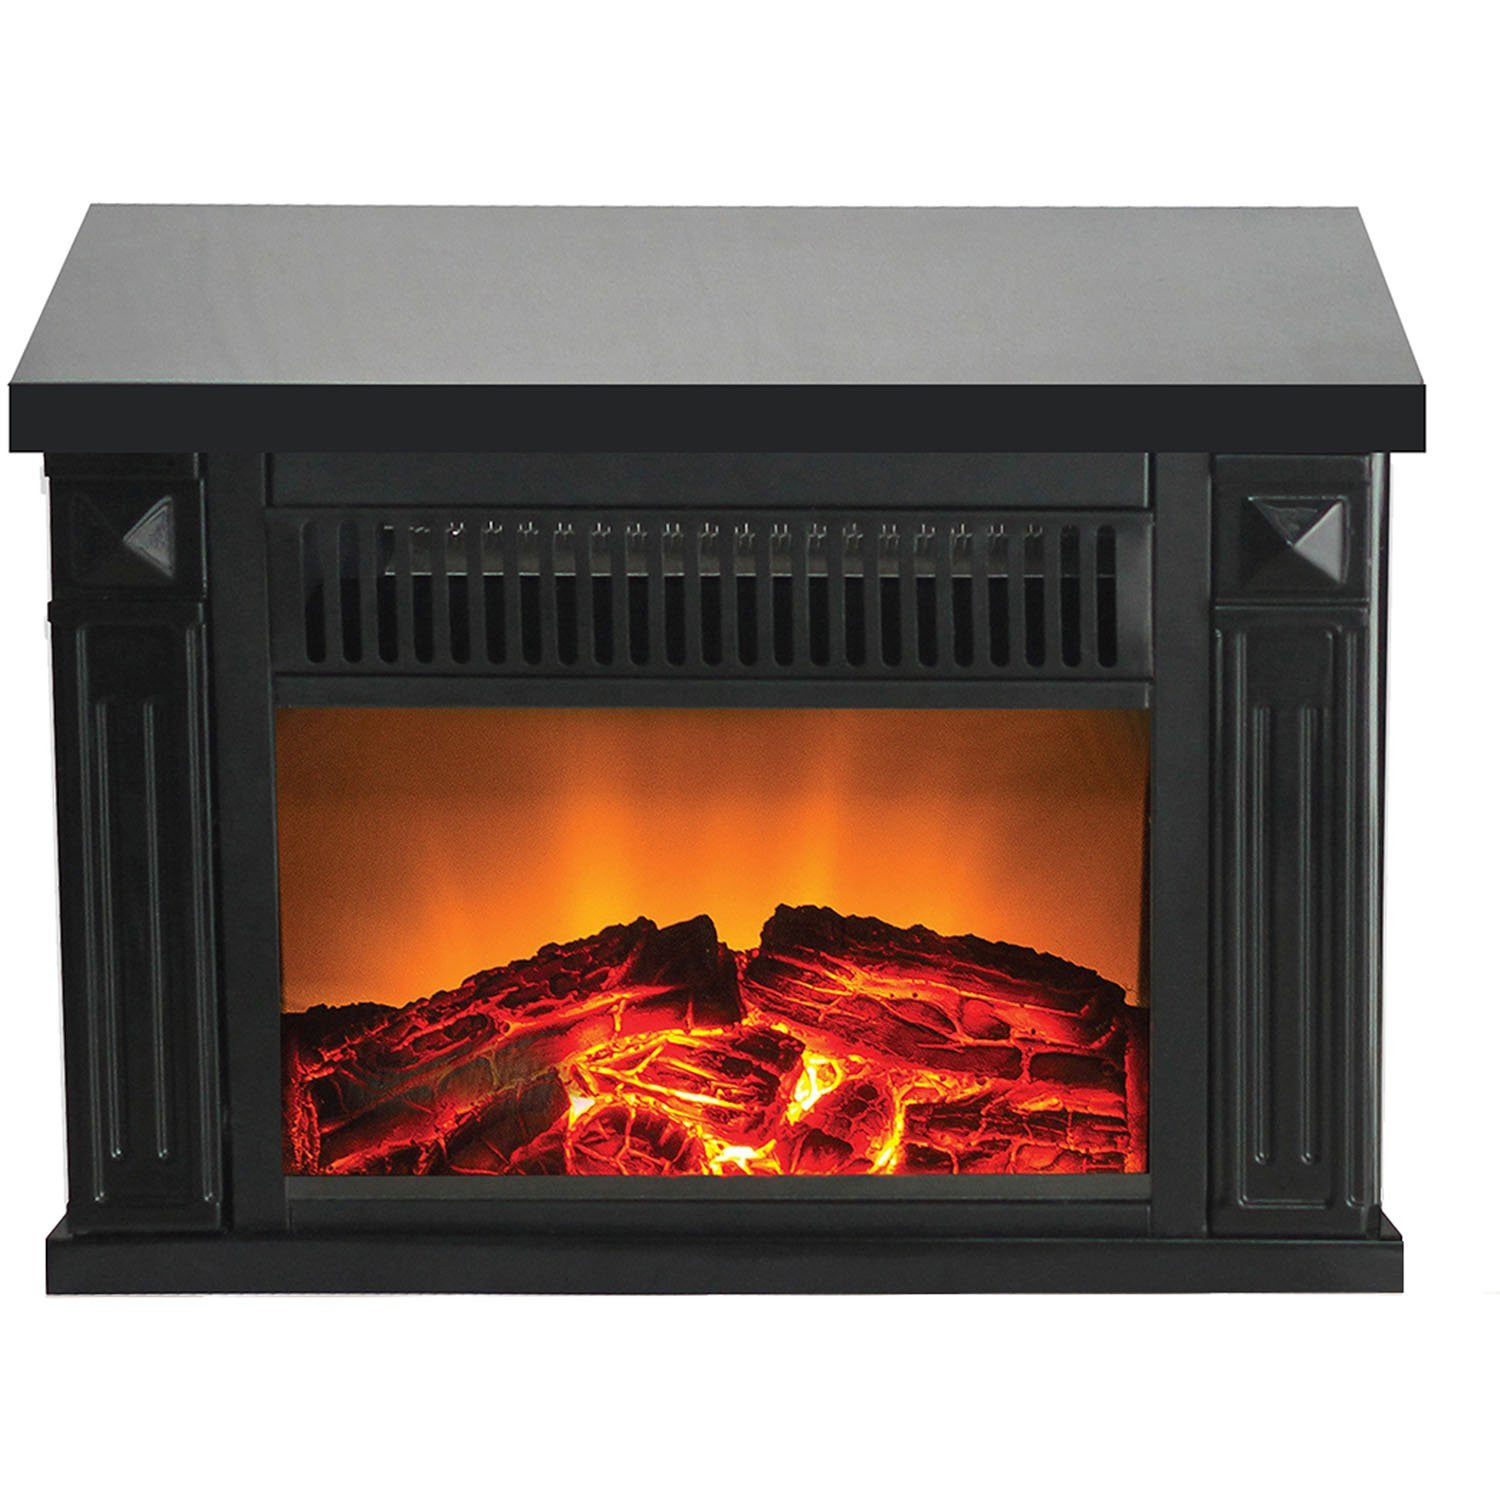 Retro Electric Fireplace
 Freestanding Fireplace Reviews Best Freestanding